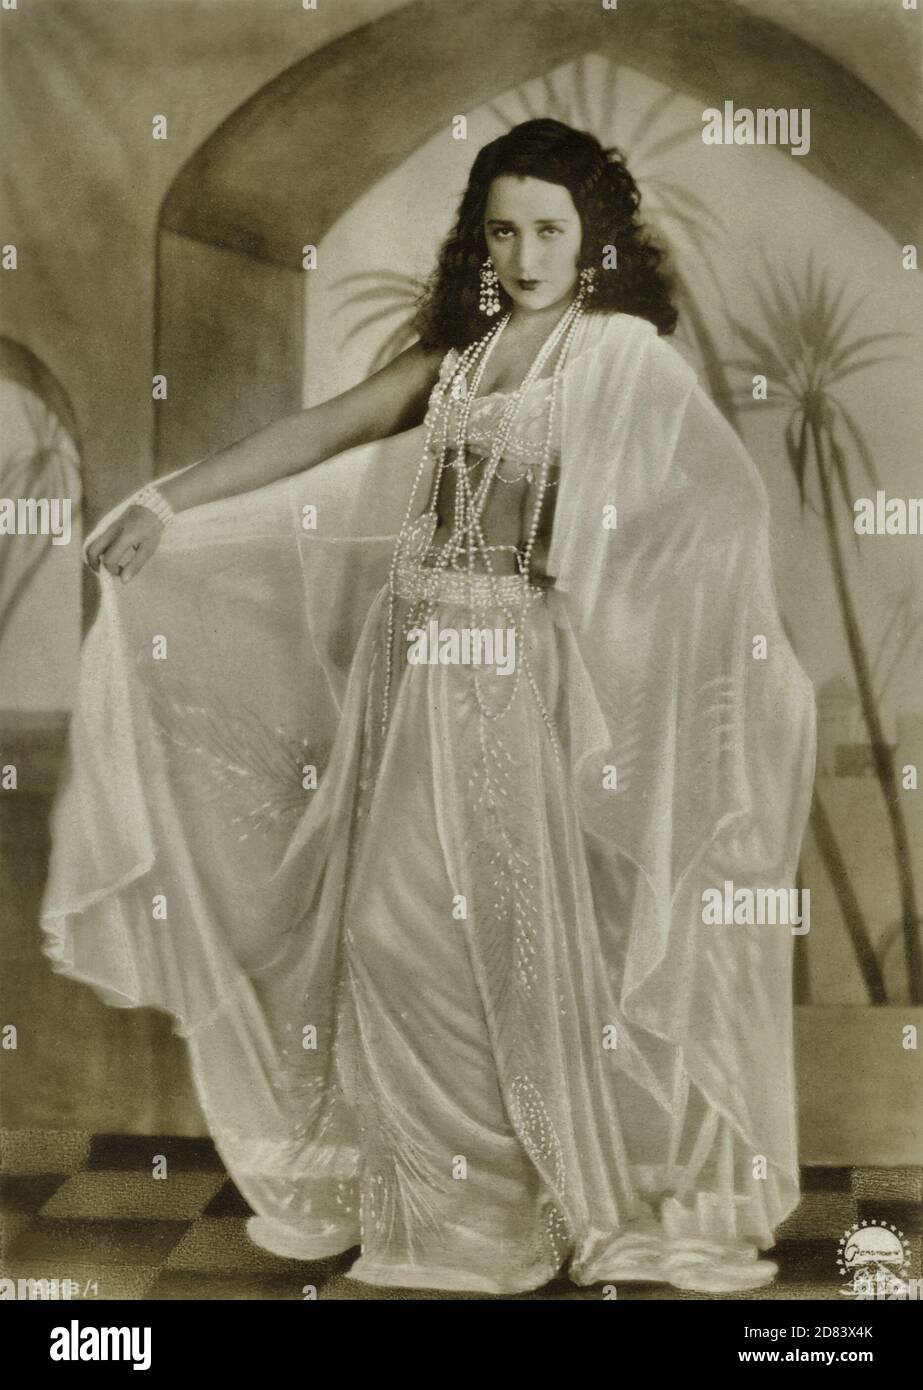 Vintage Postcard. Bebe Daniels (American actress) in 'She's a Sheik' (1927 silent film) - photo by Eugene Robert Richee - restored from original postcard by Montana Photographer. Stock Photo